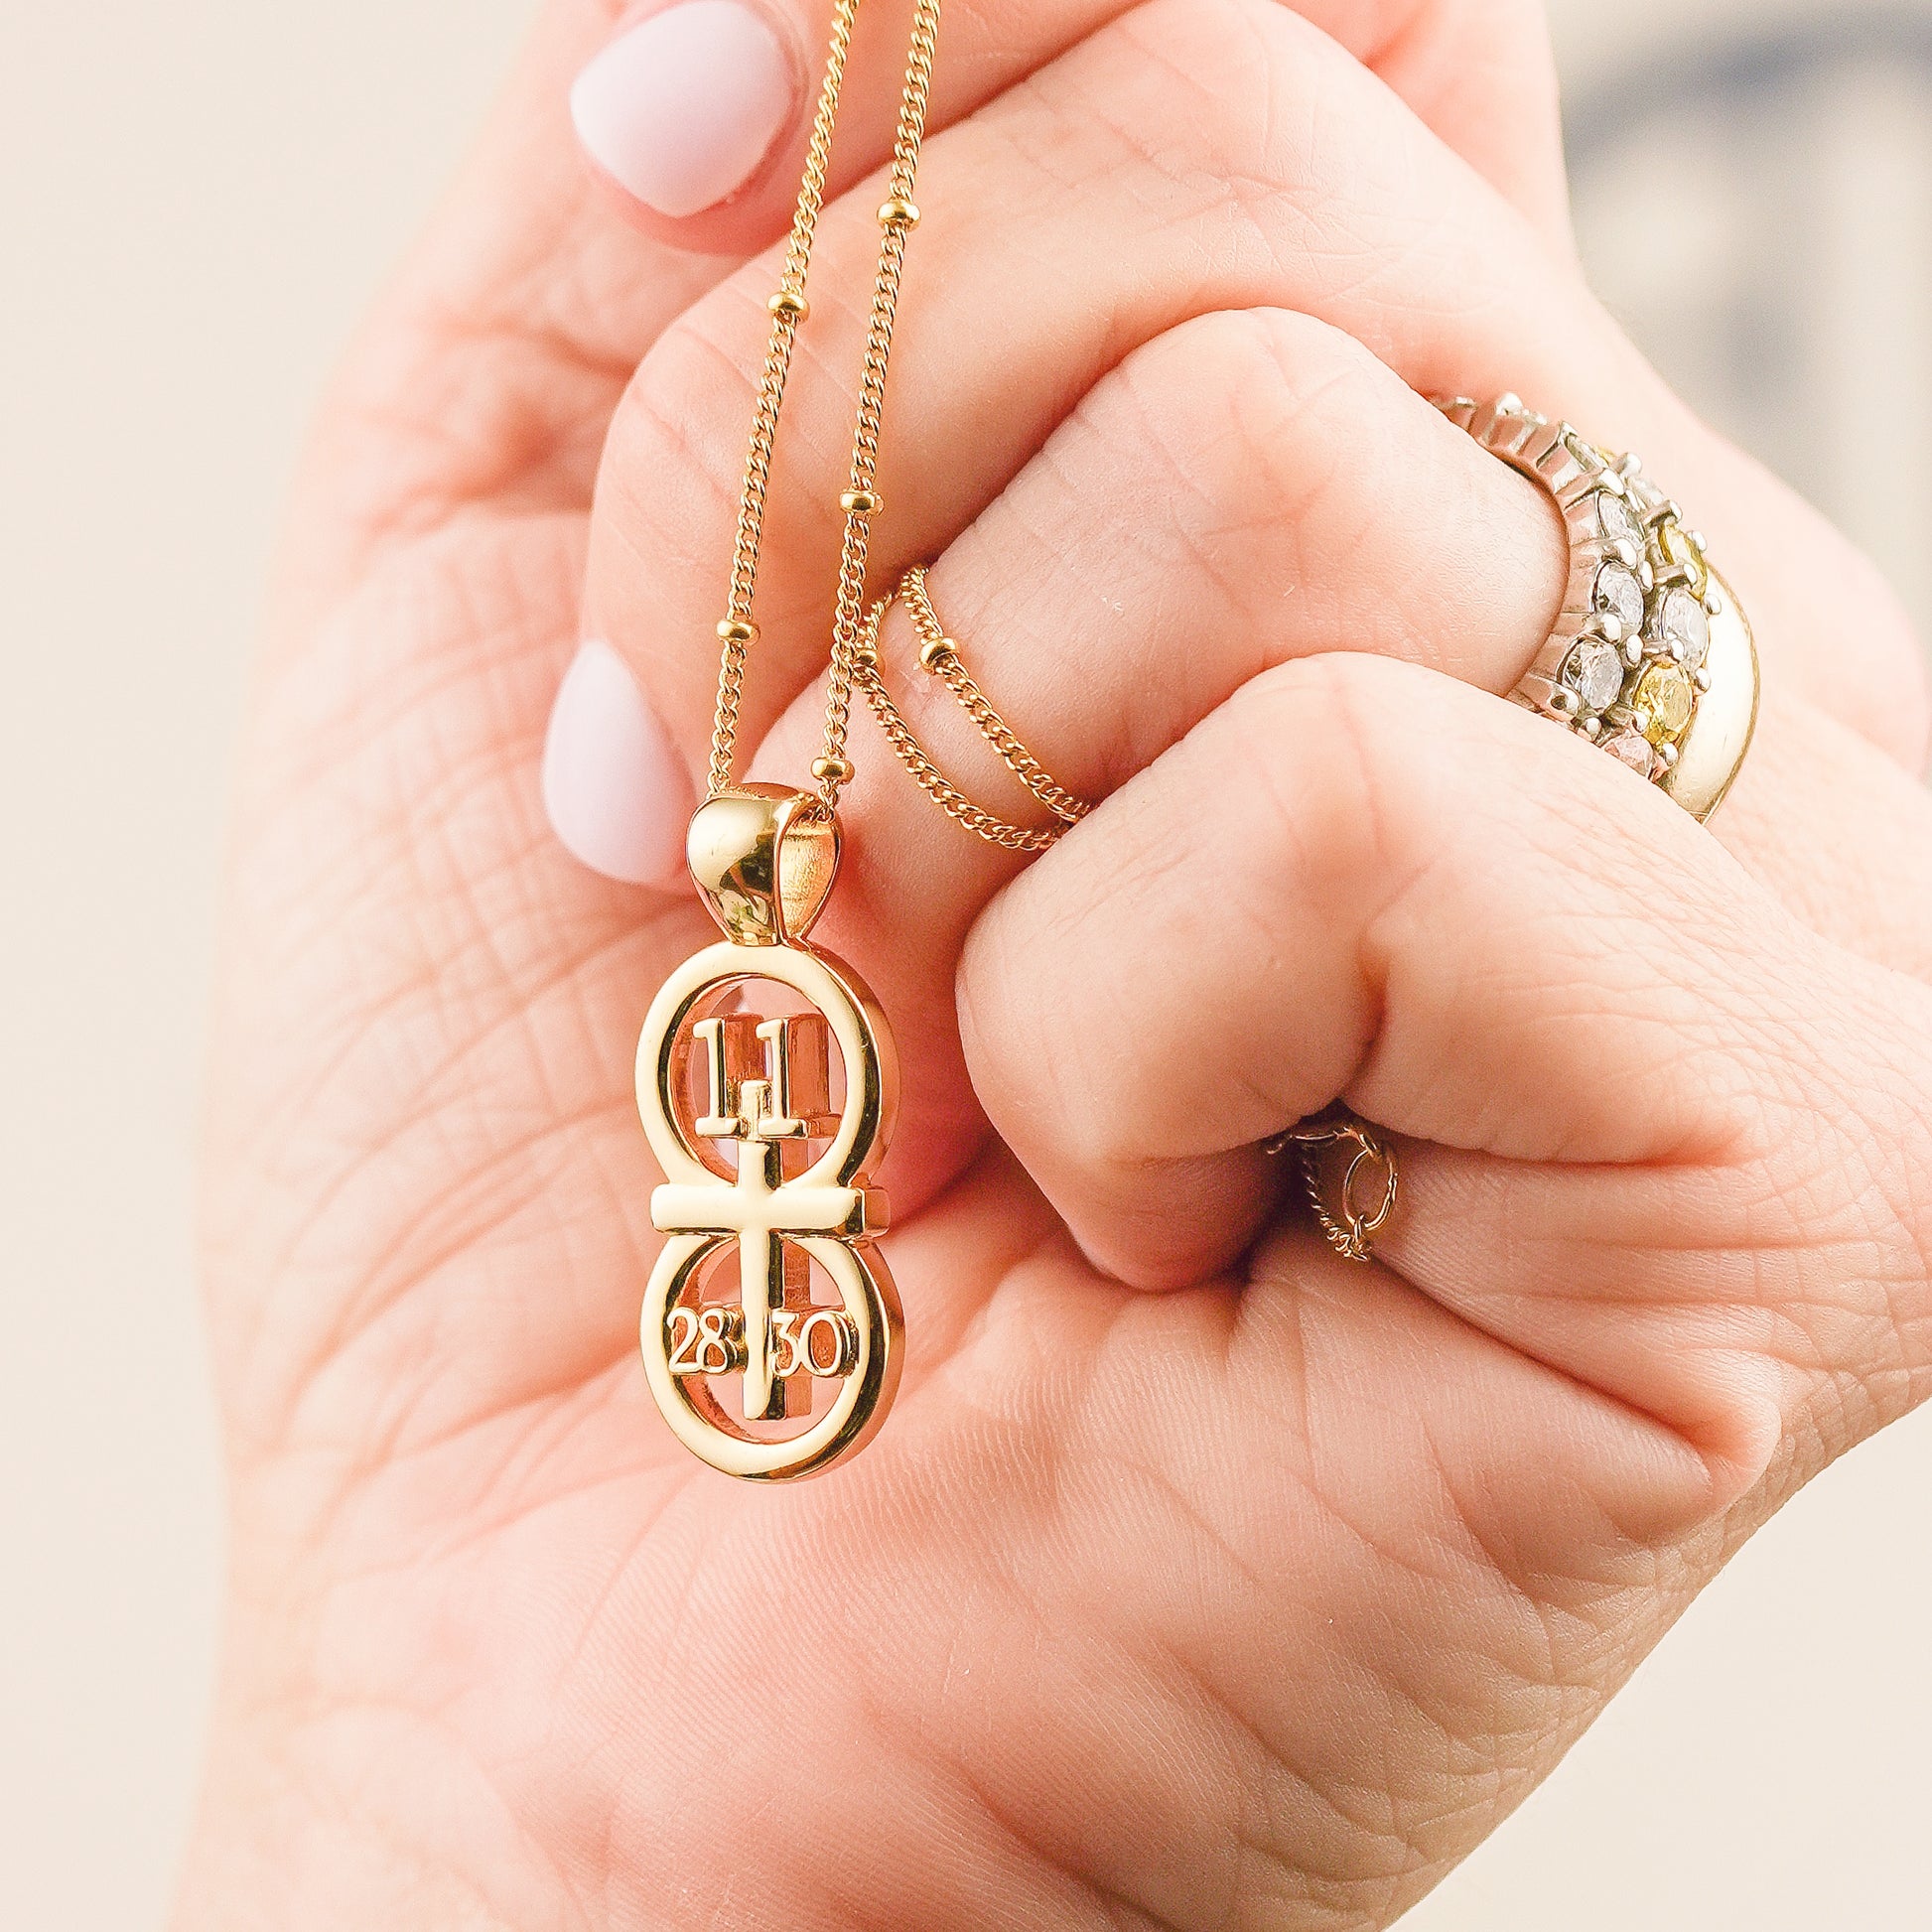 This picture displays our large pendant on our 14k gold filled satellite chain.  The pendant is draped over a hand for size comparison.  The RIYAN 29 and 11® pendant has the numbers 11, 28, and 30 intertwined with the cross to represent Matthew 11:28-30 with the chapter word "Matthew" inscribed on the back.